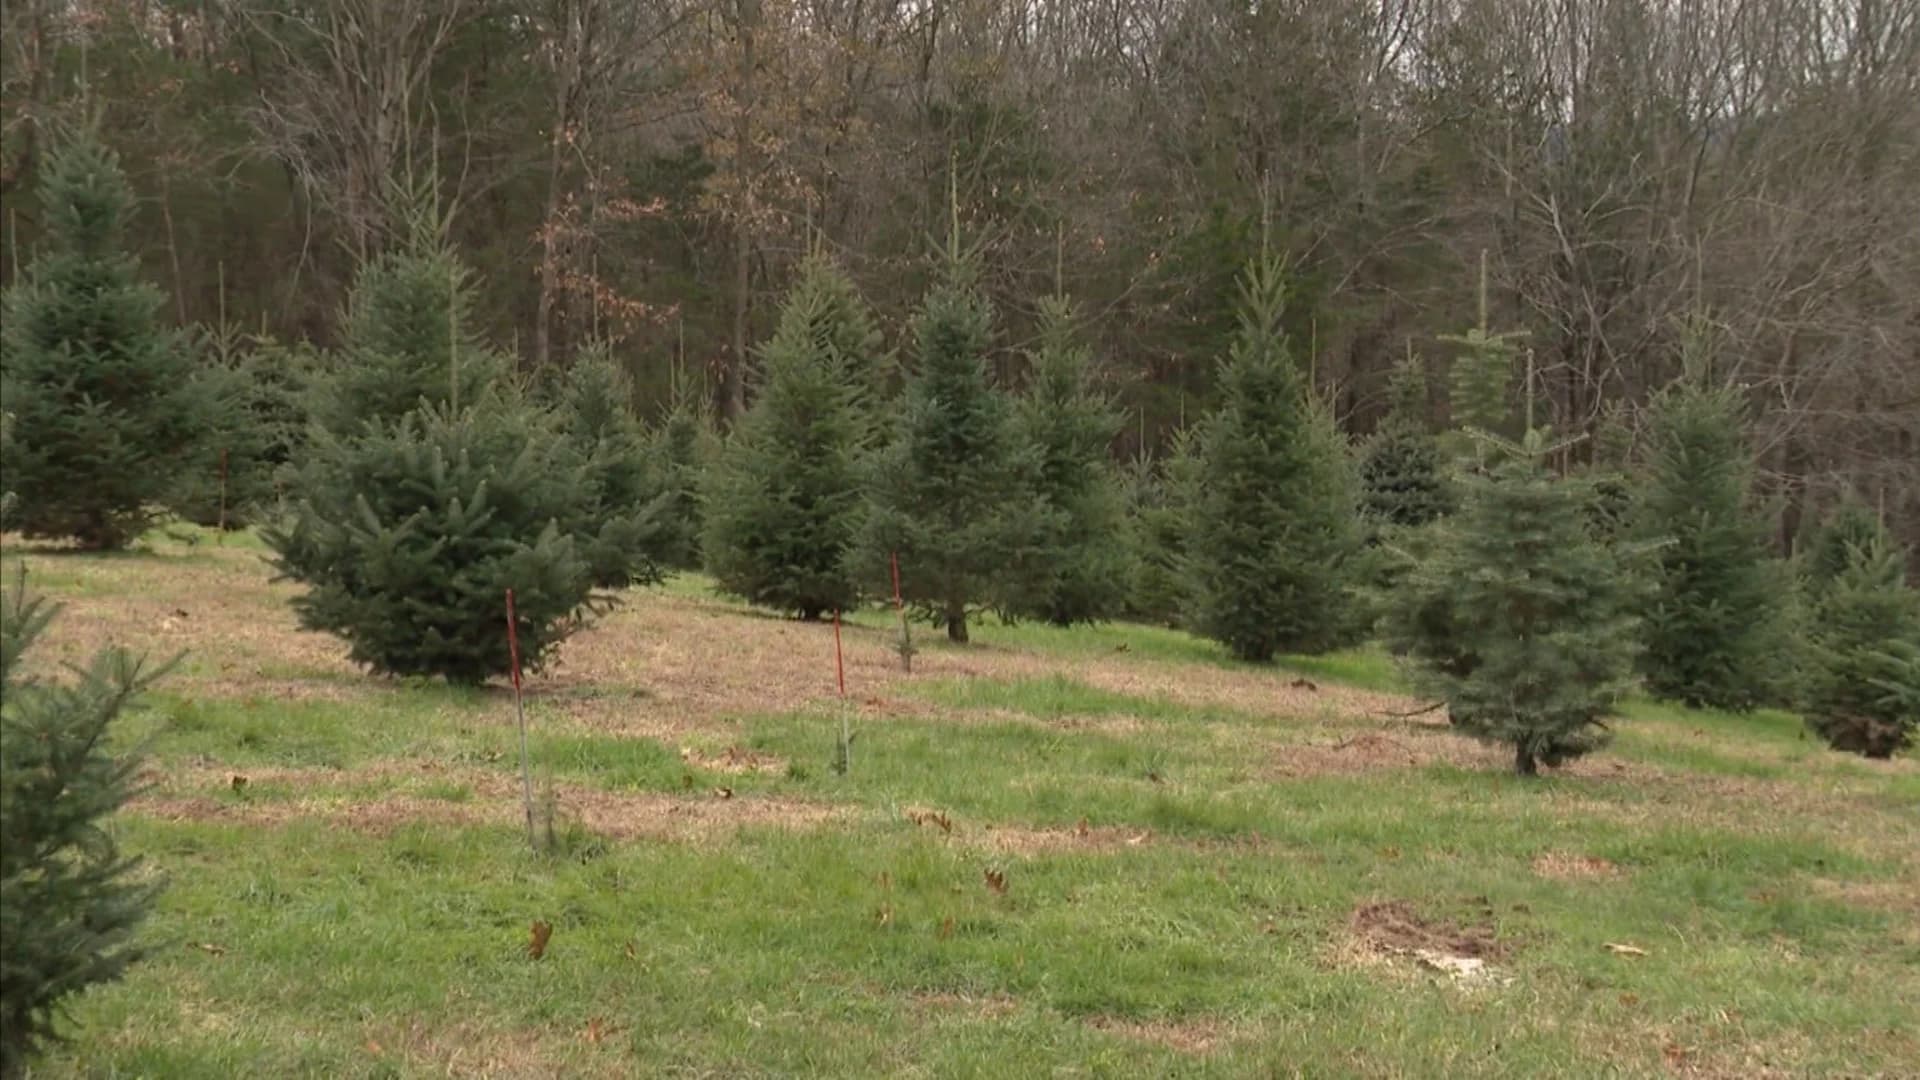 Christmas tree shortage could mean higher prices